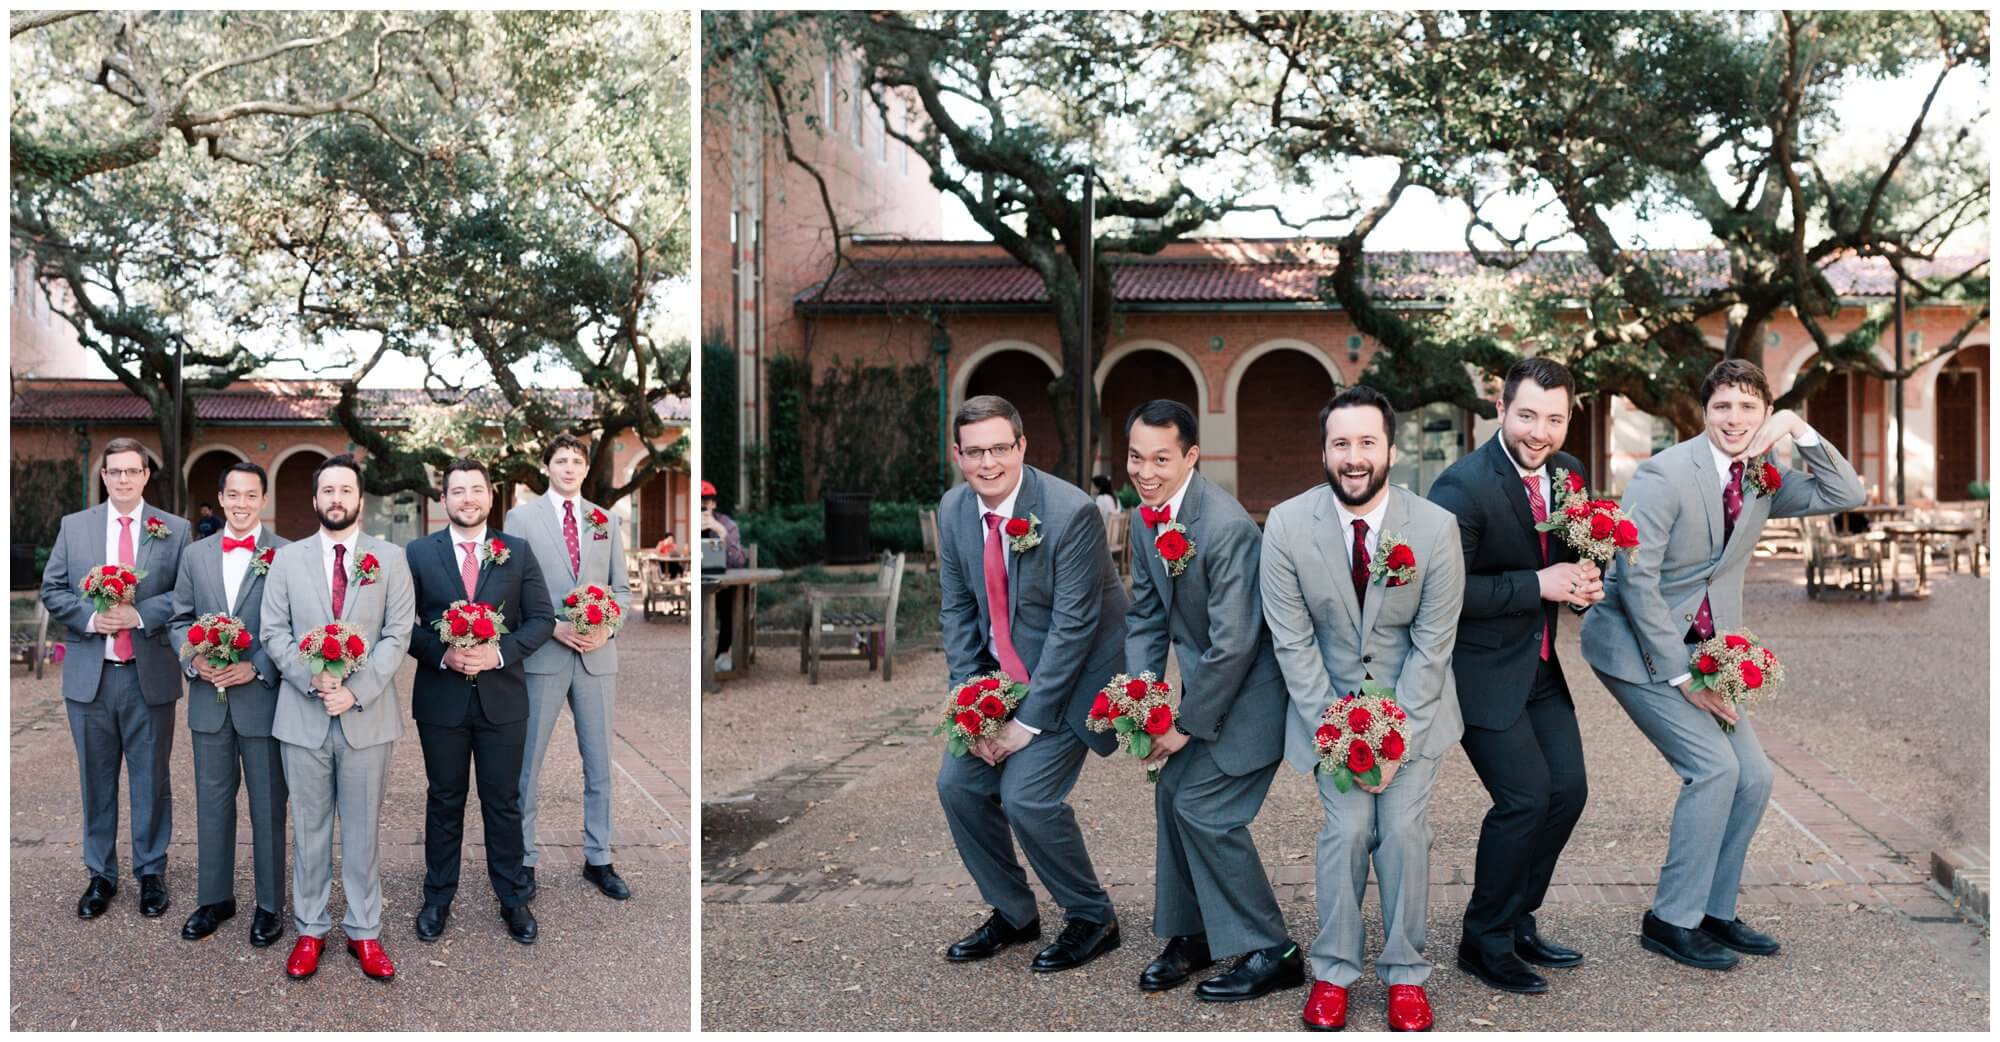 wedding party portraits at Rice University in Houston Texas by Swish and Click Photography